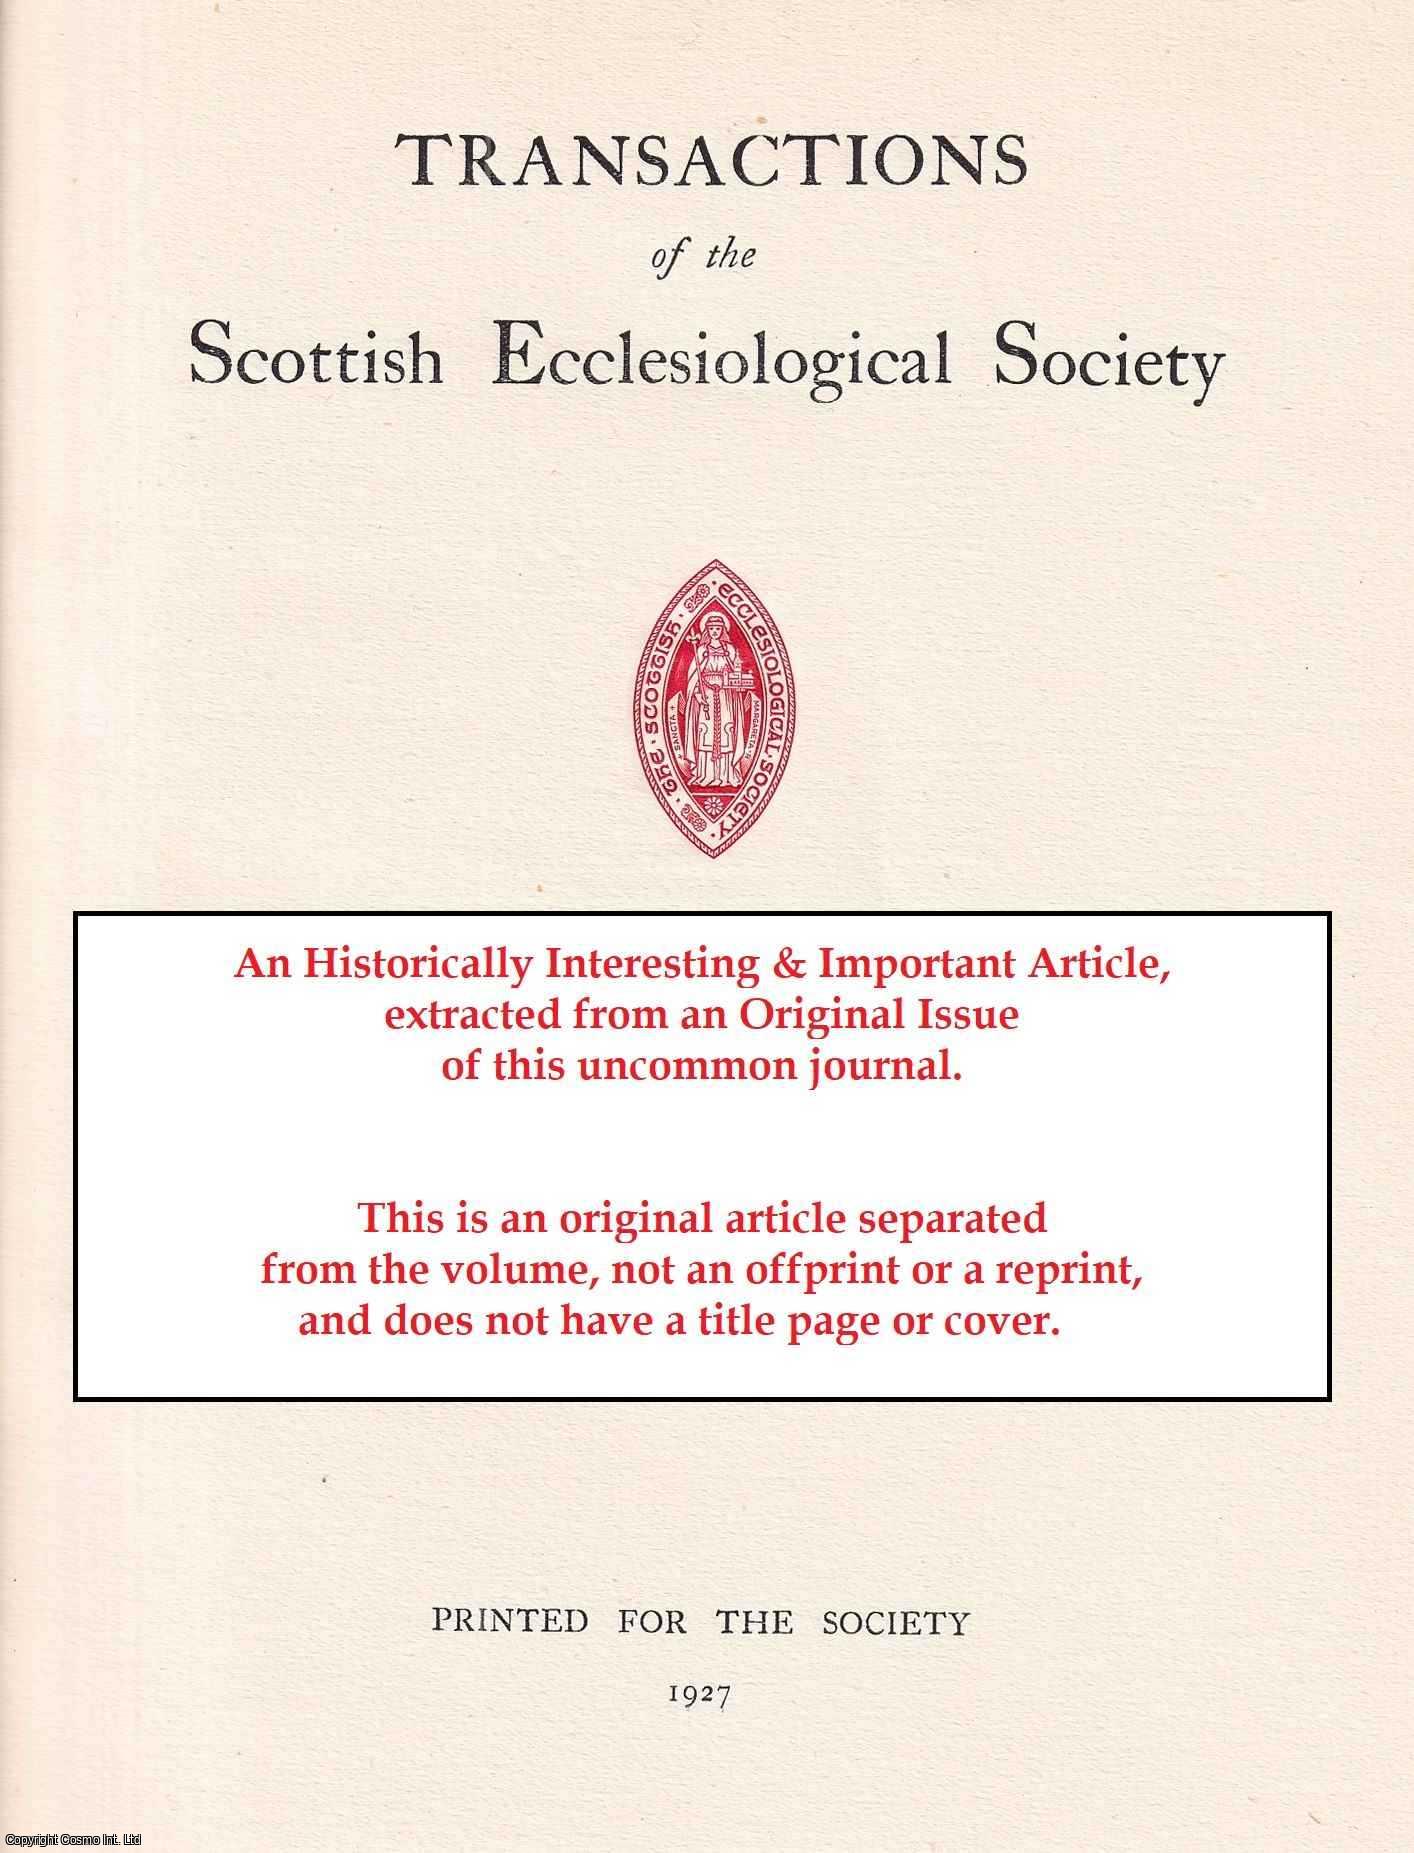 Thomas Ross and Hippolyte Blanc - Muthill, Tullibardine, Ratho, Kirkliston, Inchmahome and Edinburgh; Churches, Priory and Castle. An original article from the Transactions of the Scottish Ecclesiological Society, 1914.